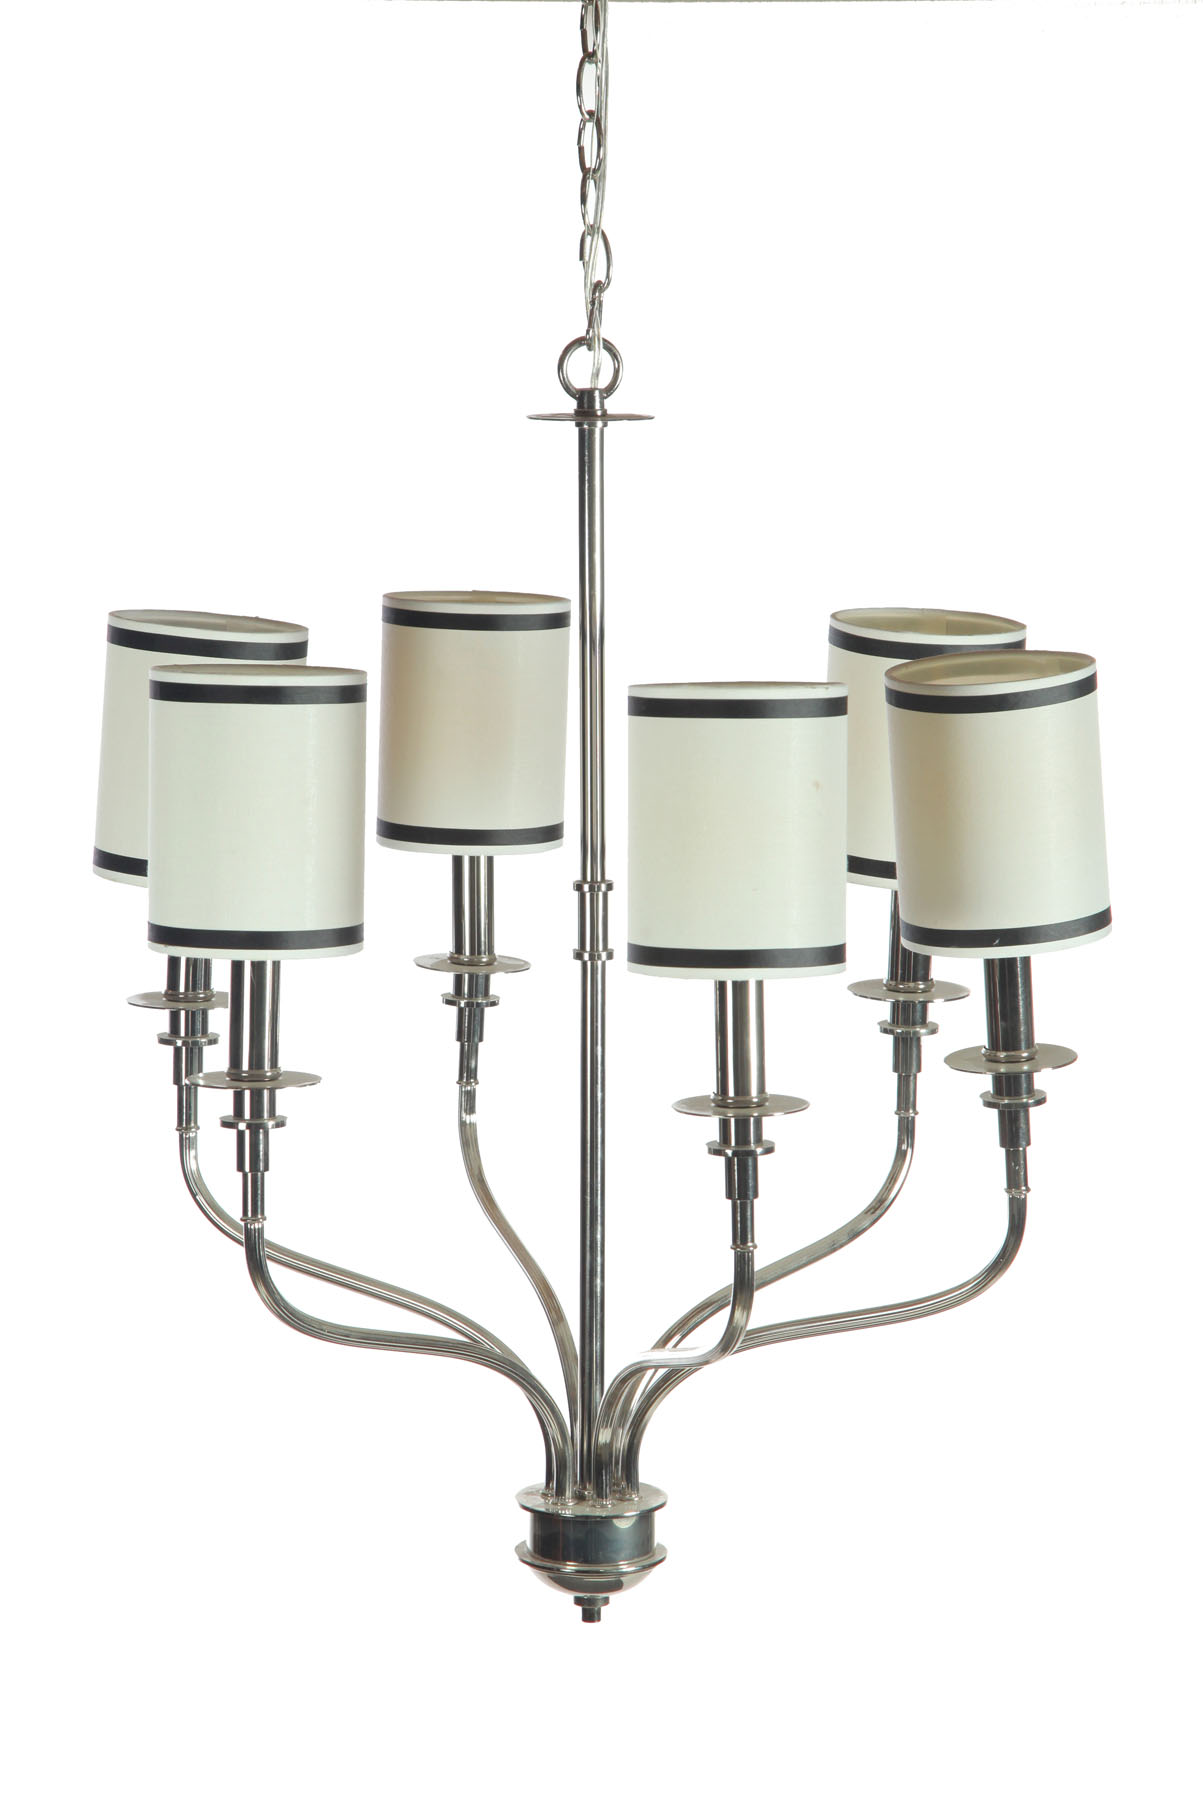 EIGHT MODERN CHANDELIERS WITH SCONCES  1137ea